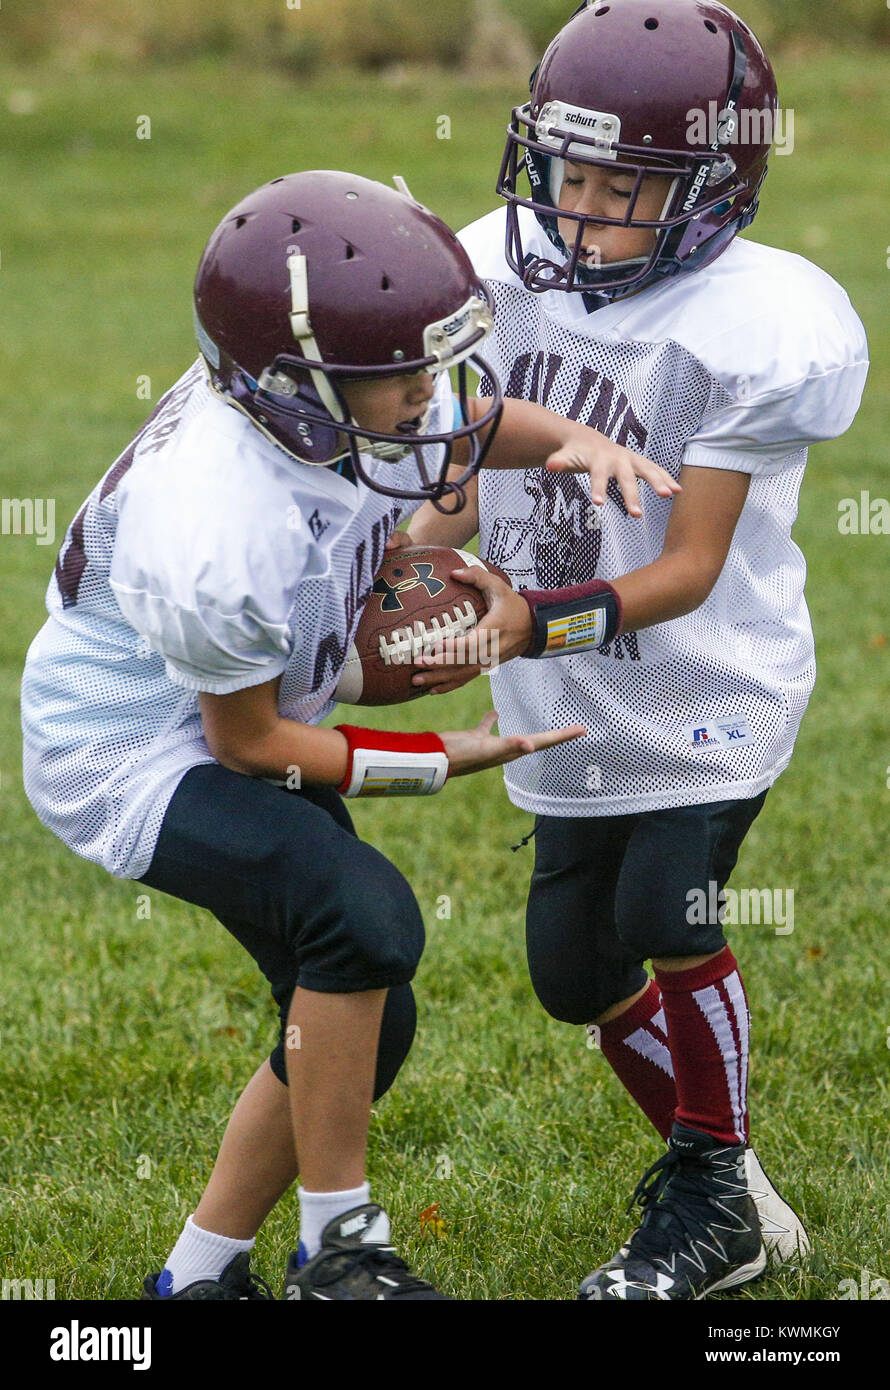 Davenport, Iowa, USA. 24th Sep, 2016. Patriots Quarterback Lyric Sterling (9) hands off to teammate Kadyn Sharpe (45) while warming up for their youth game on the freshman field at Moline High School on Saturday, September 24, 2016. The Moline Youth program Patriots faced off with the Chiefs in their third and fourth grade age group game. Credit: Andy Abeyta/Quad-City Times/ZUMA Wire/Alamy Live News Stock Photo